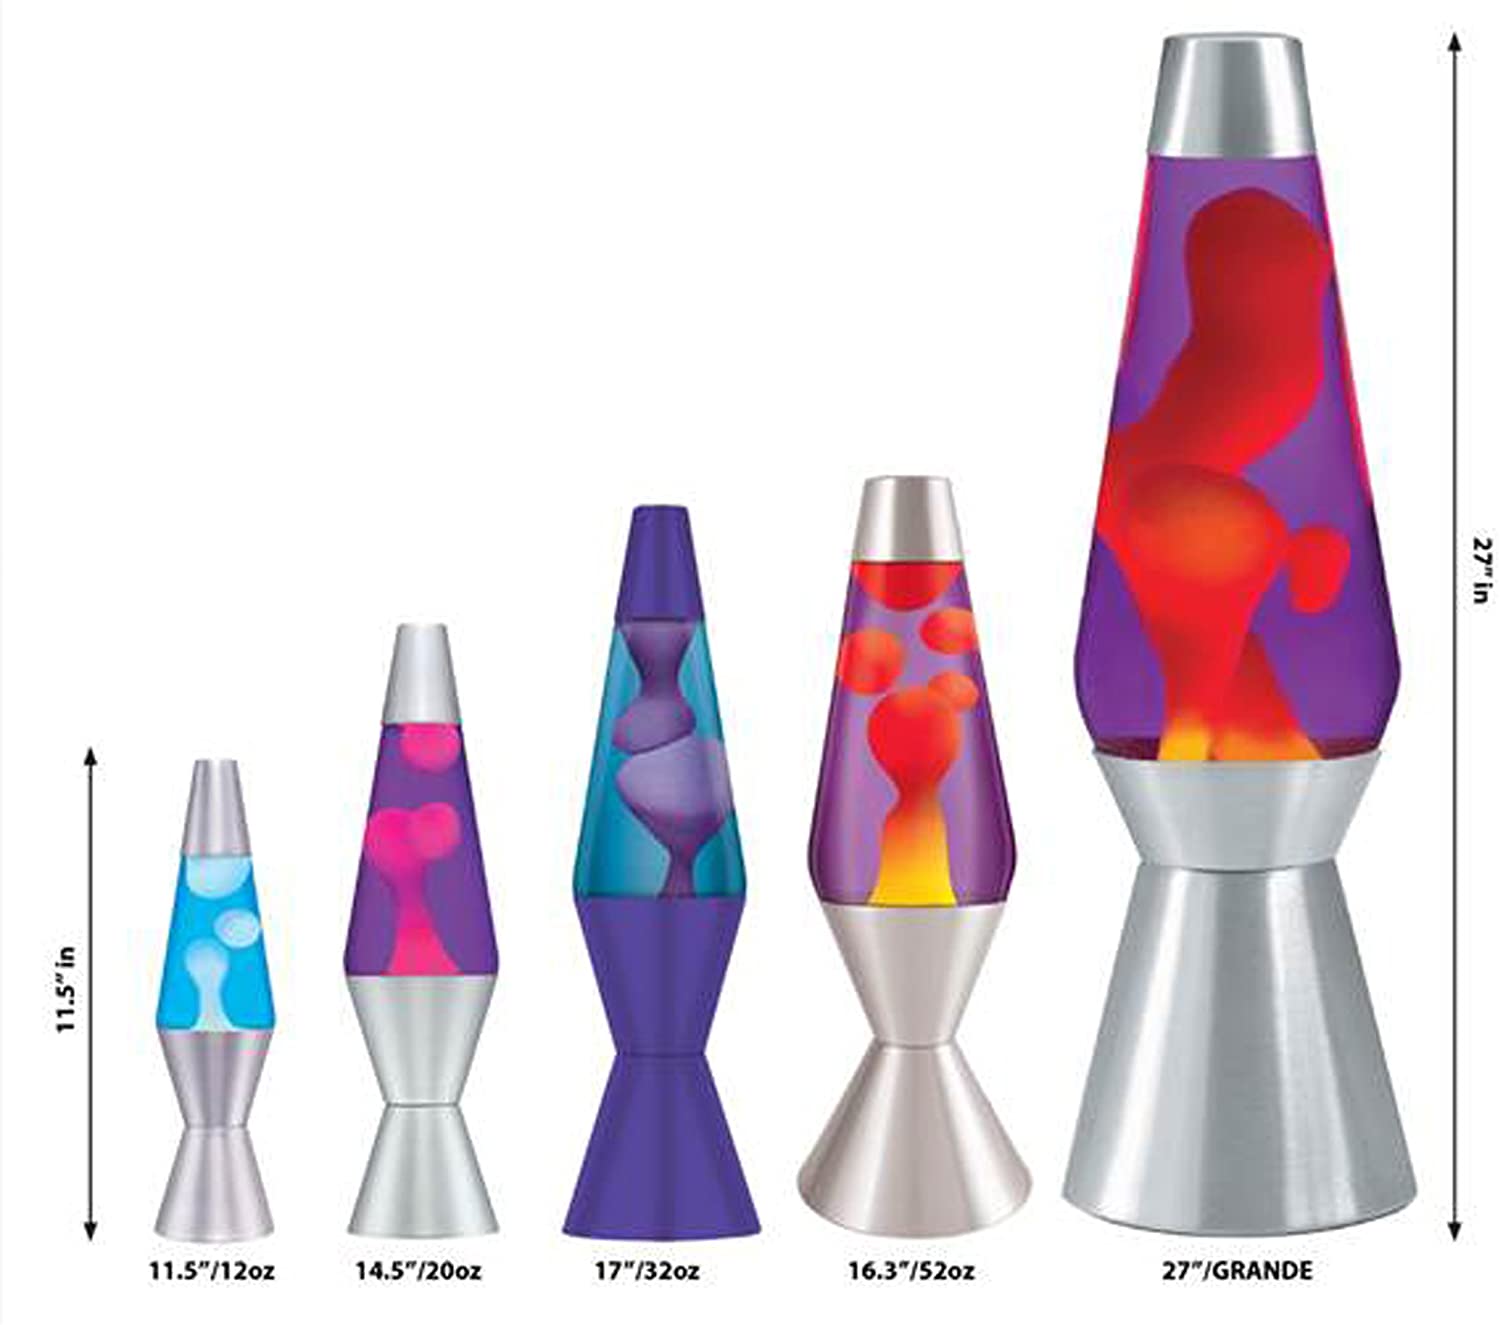 Sliver base lava lamp. 10 Unique Lava Lamps Ideas and Complete Guide Before Buying - 6